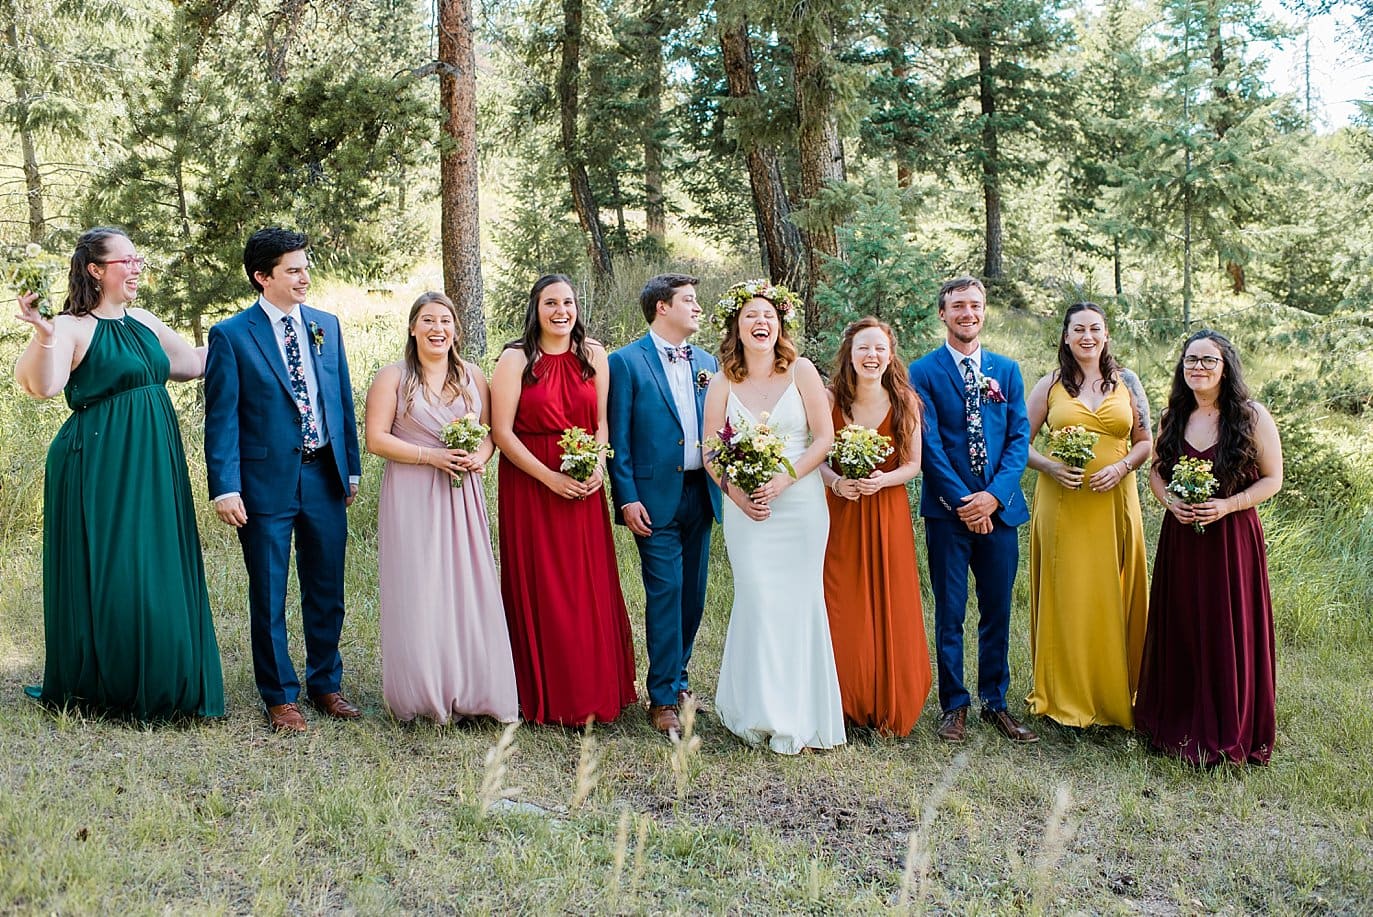 jewel toned bridesmaids dresses at Evergreen Red Barn wedding by Evergreen wedding photographer Jennie Crate